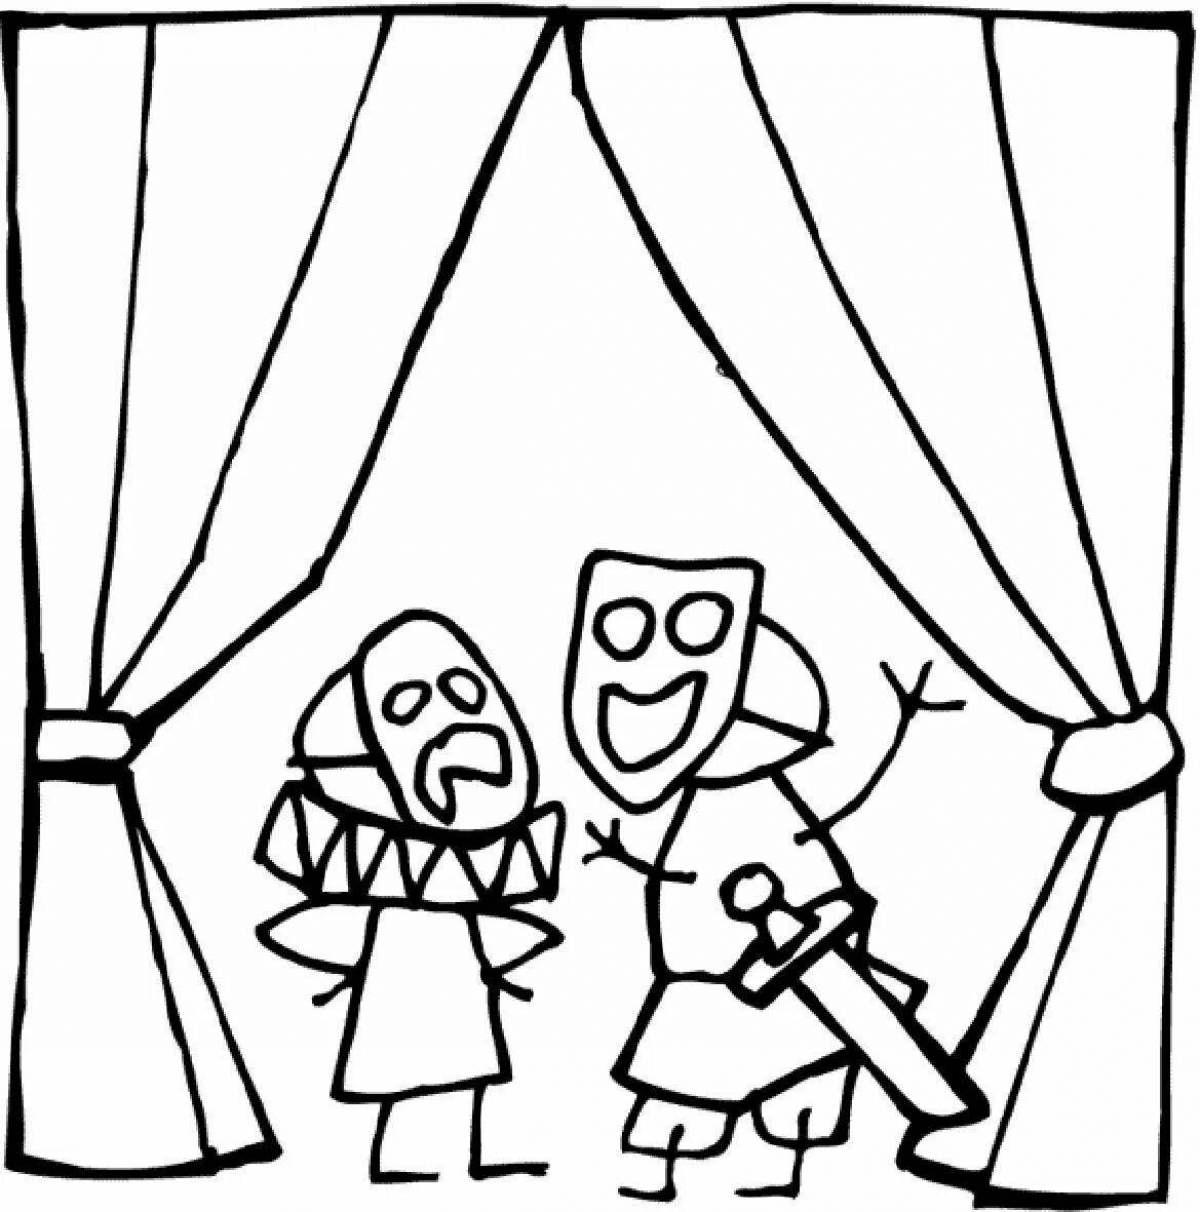 Puppet theater live coloring page